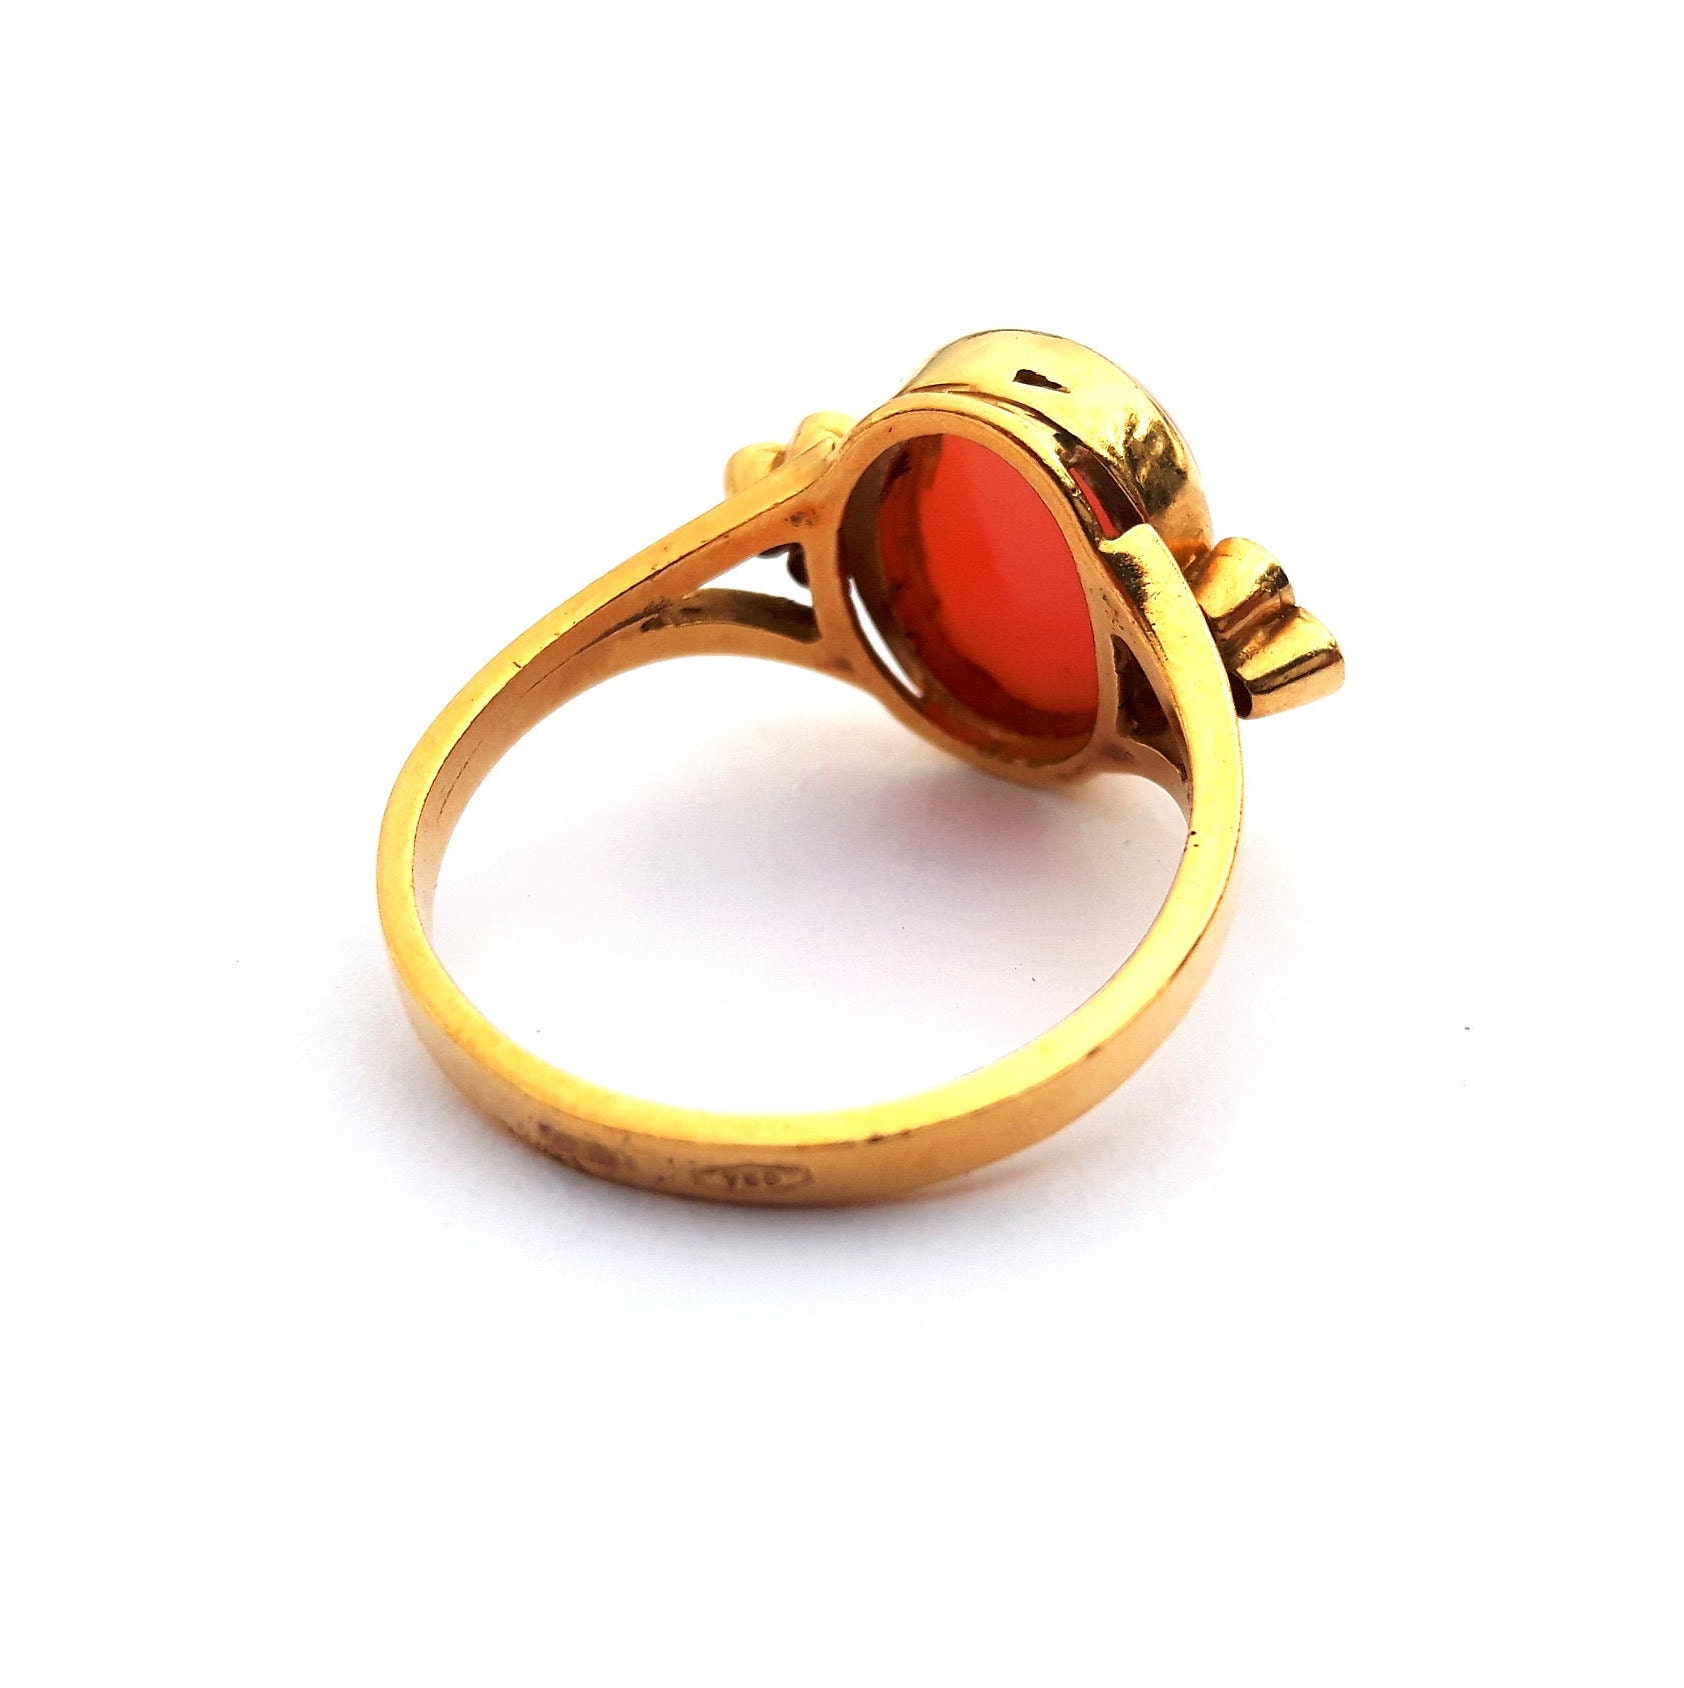 Oval Cabochon Cut Red Coral Ring 14K Yellow Gold